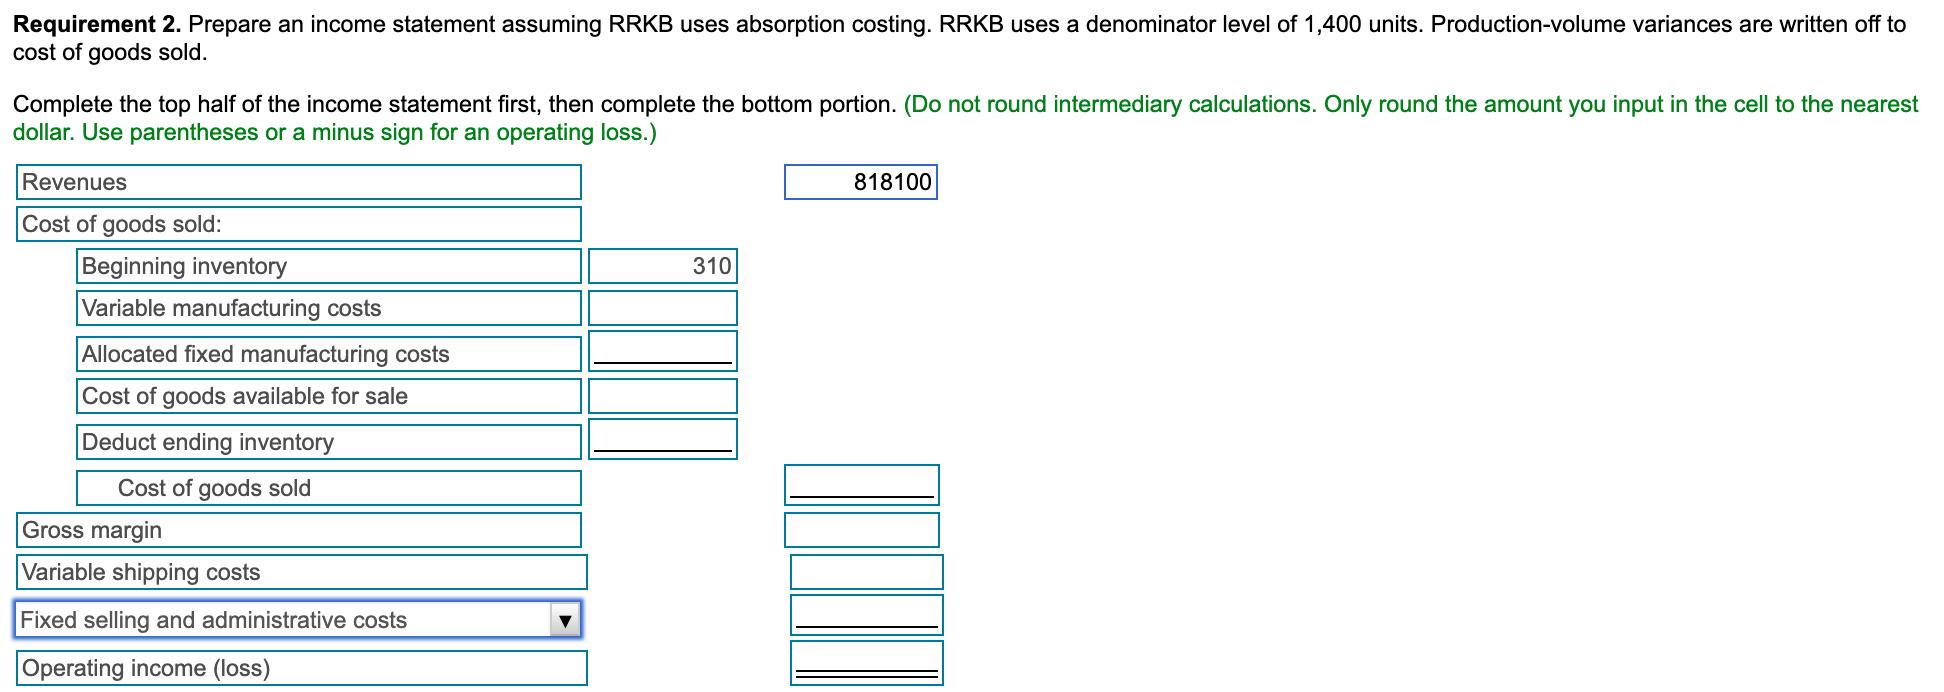 Requirement 2. Prepare an income statement assuming RRKB uses absorption costing. RRKB uses a denominator level of 1,400 unit